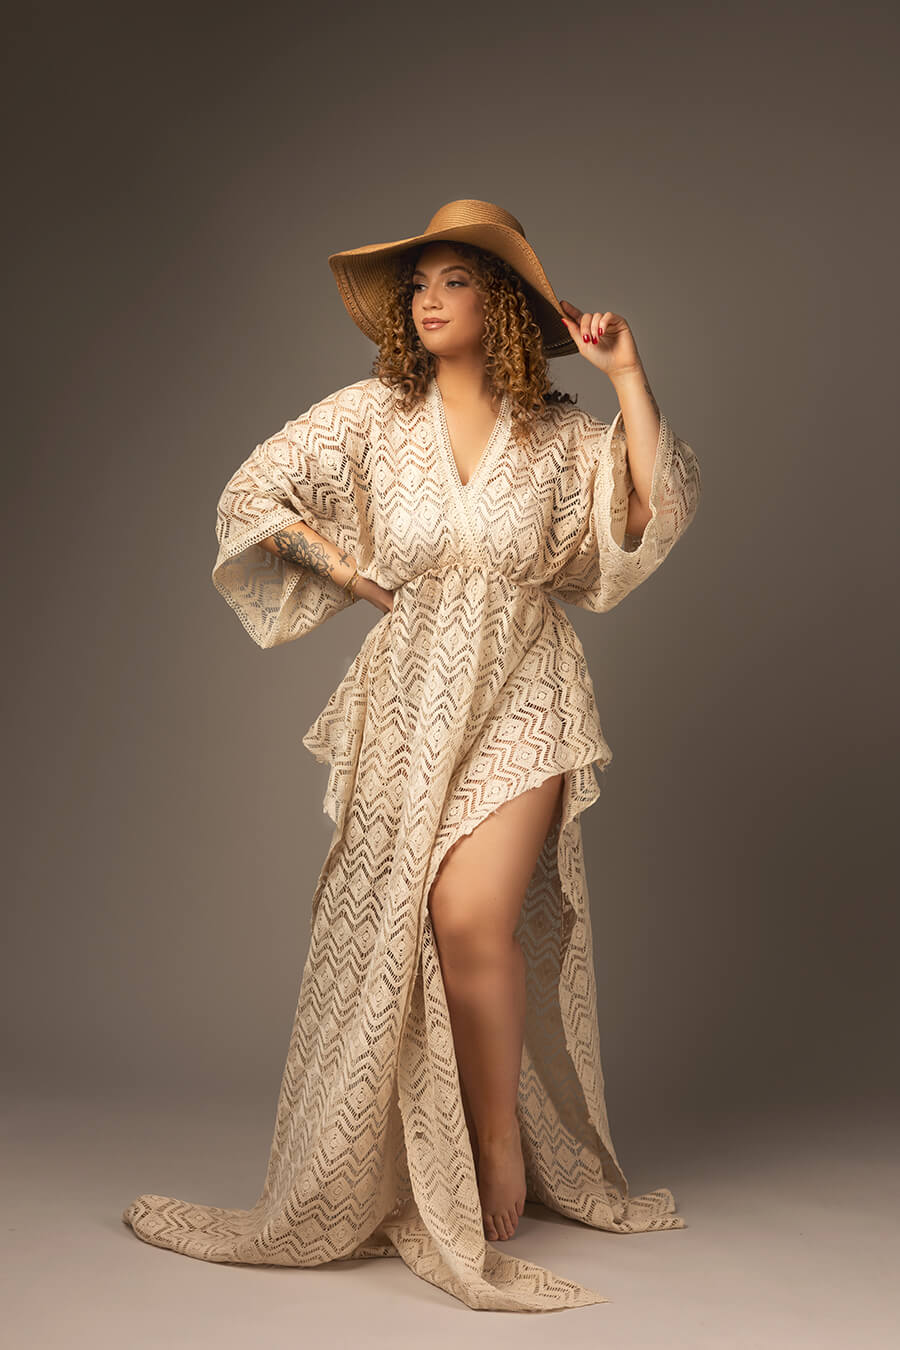 model poses in a studio wearing a western boho chic dress in ecru color. the dress is made of a special boho lace fabric. the model has a brown hat to match the style. 